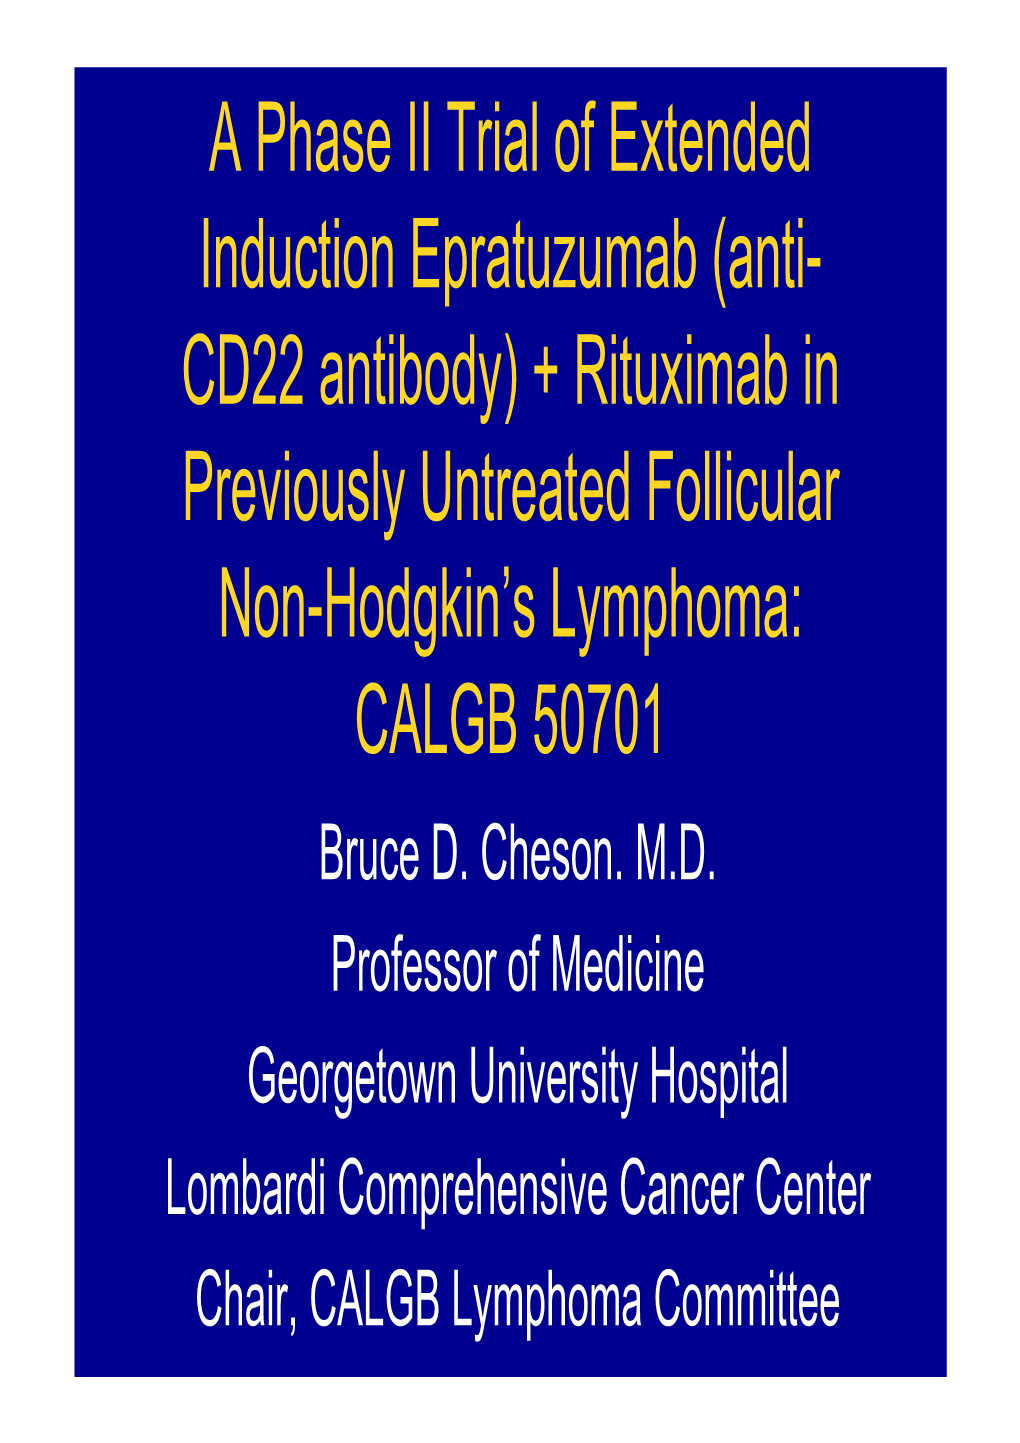 + Rituximab in Previously Untreated Follicular Non-Hodgkin’S Lymphoma: CALGB 50701 Bruce D